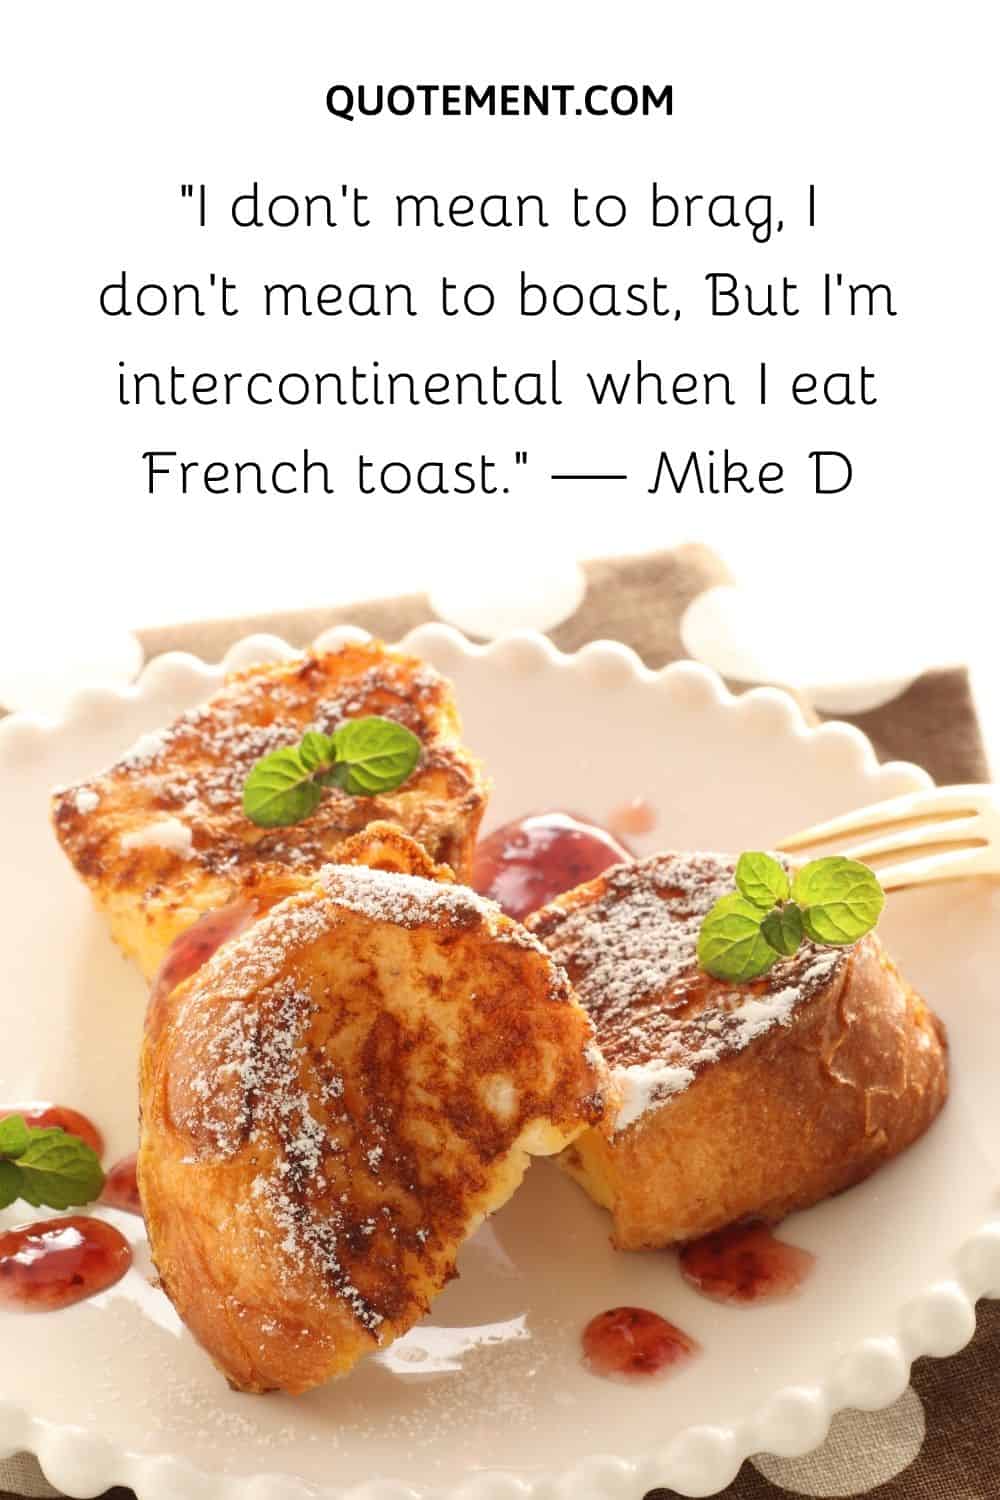 I’m intercontinental when I eat French toast